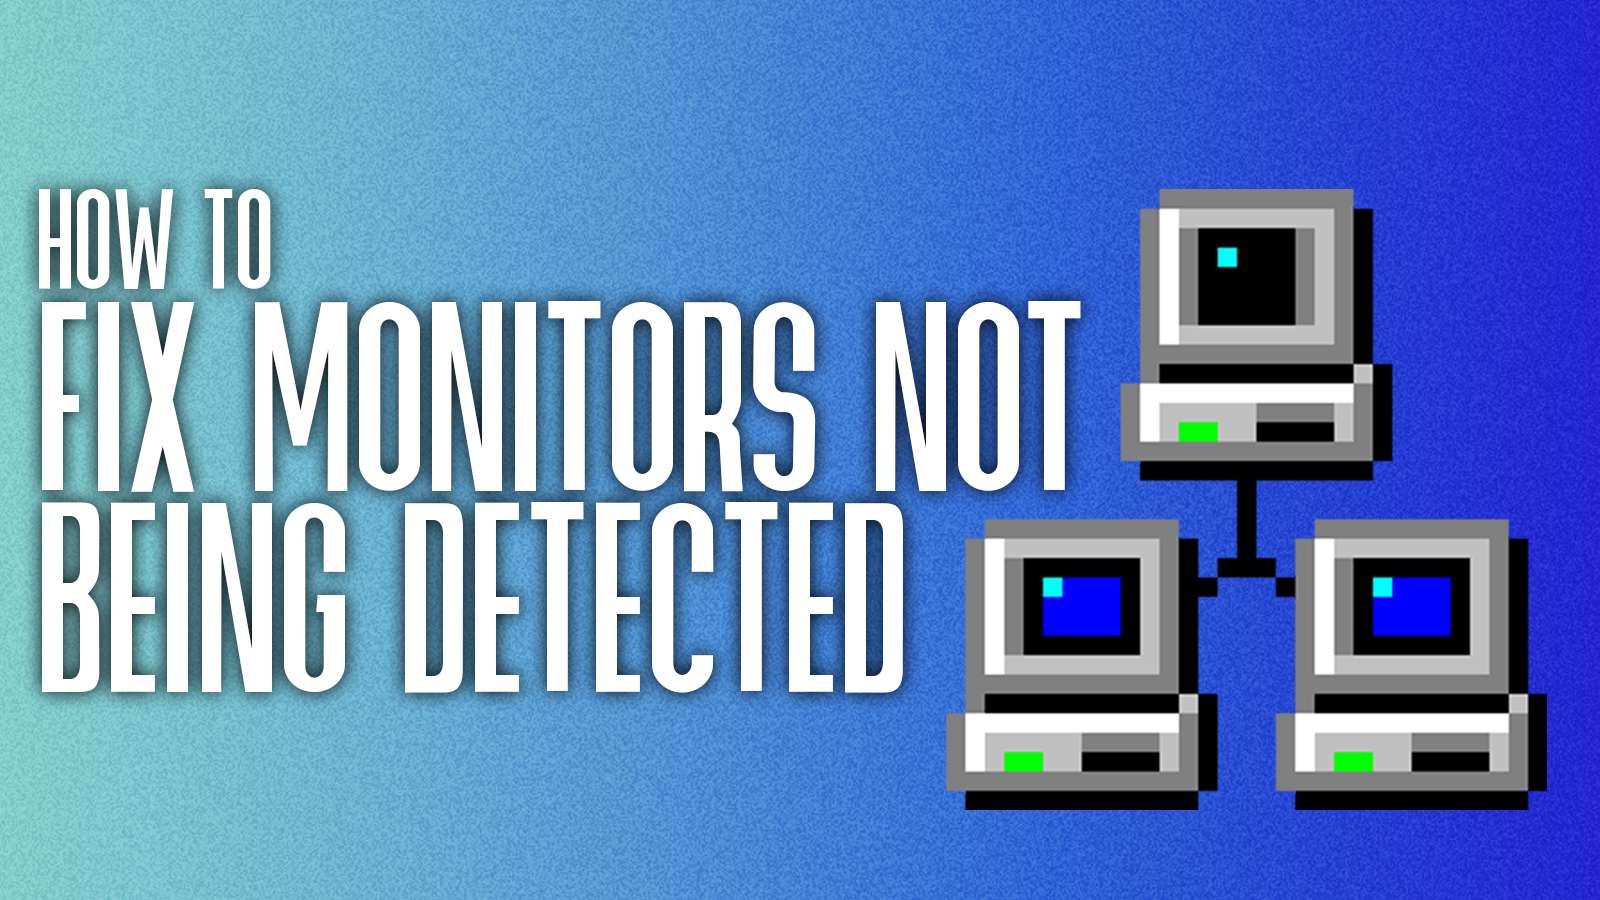 How to Know If Your Computer is Being Monitored